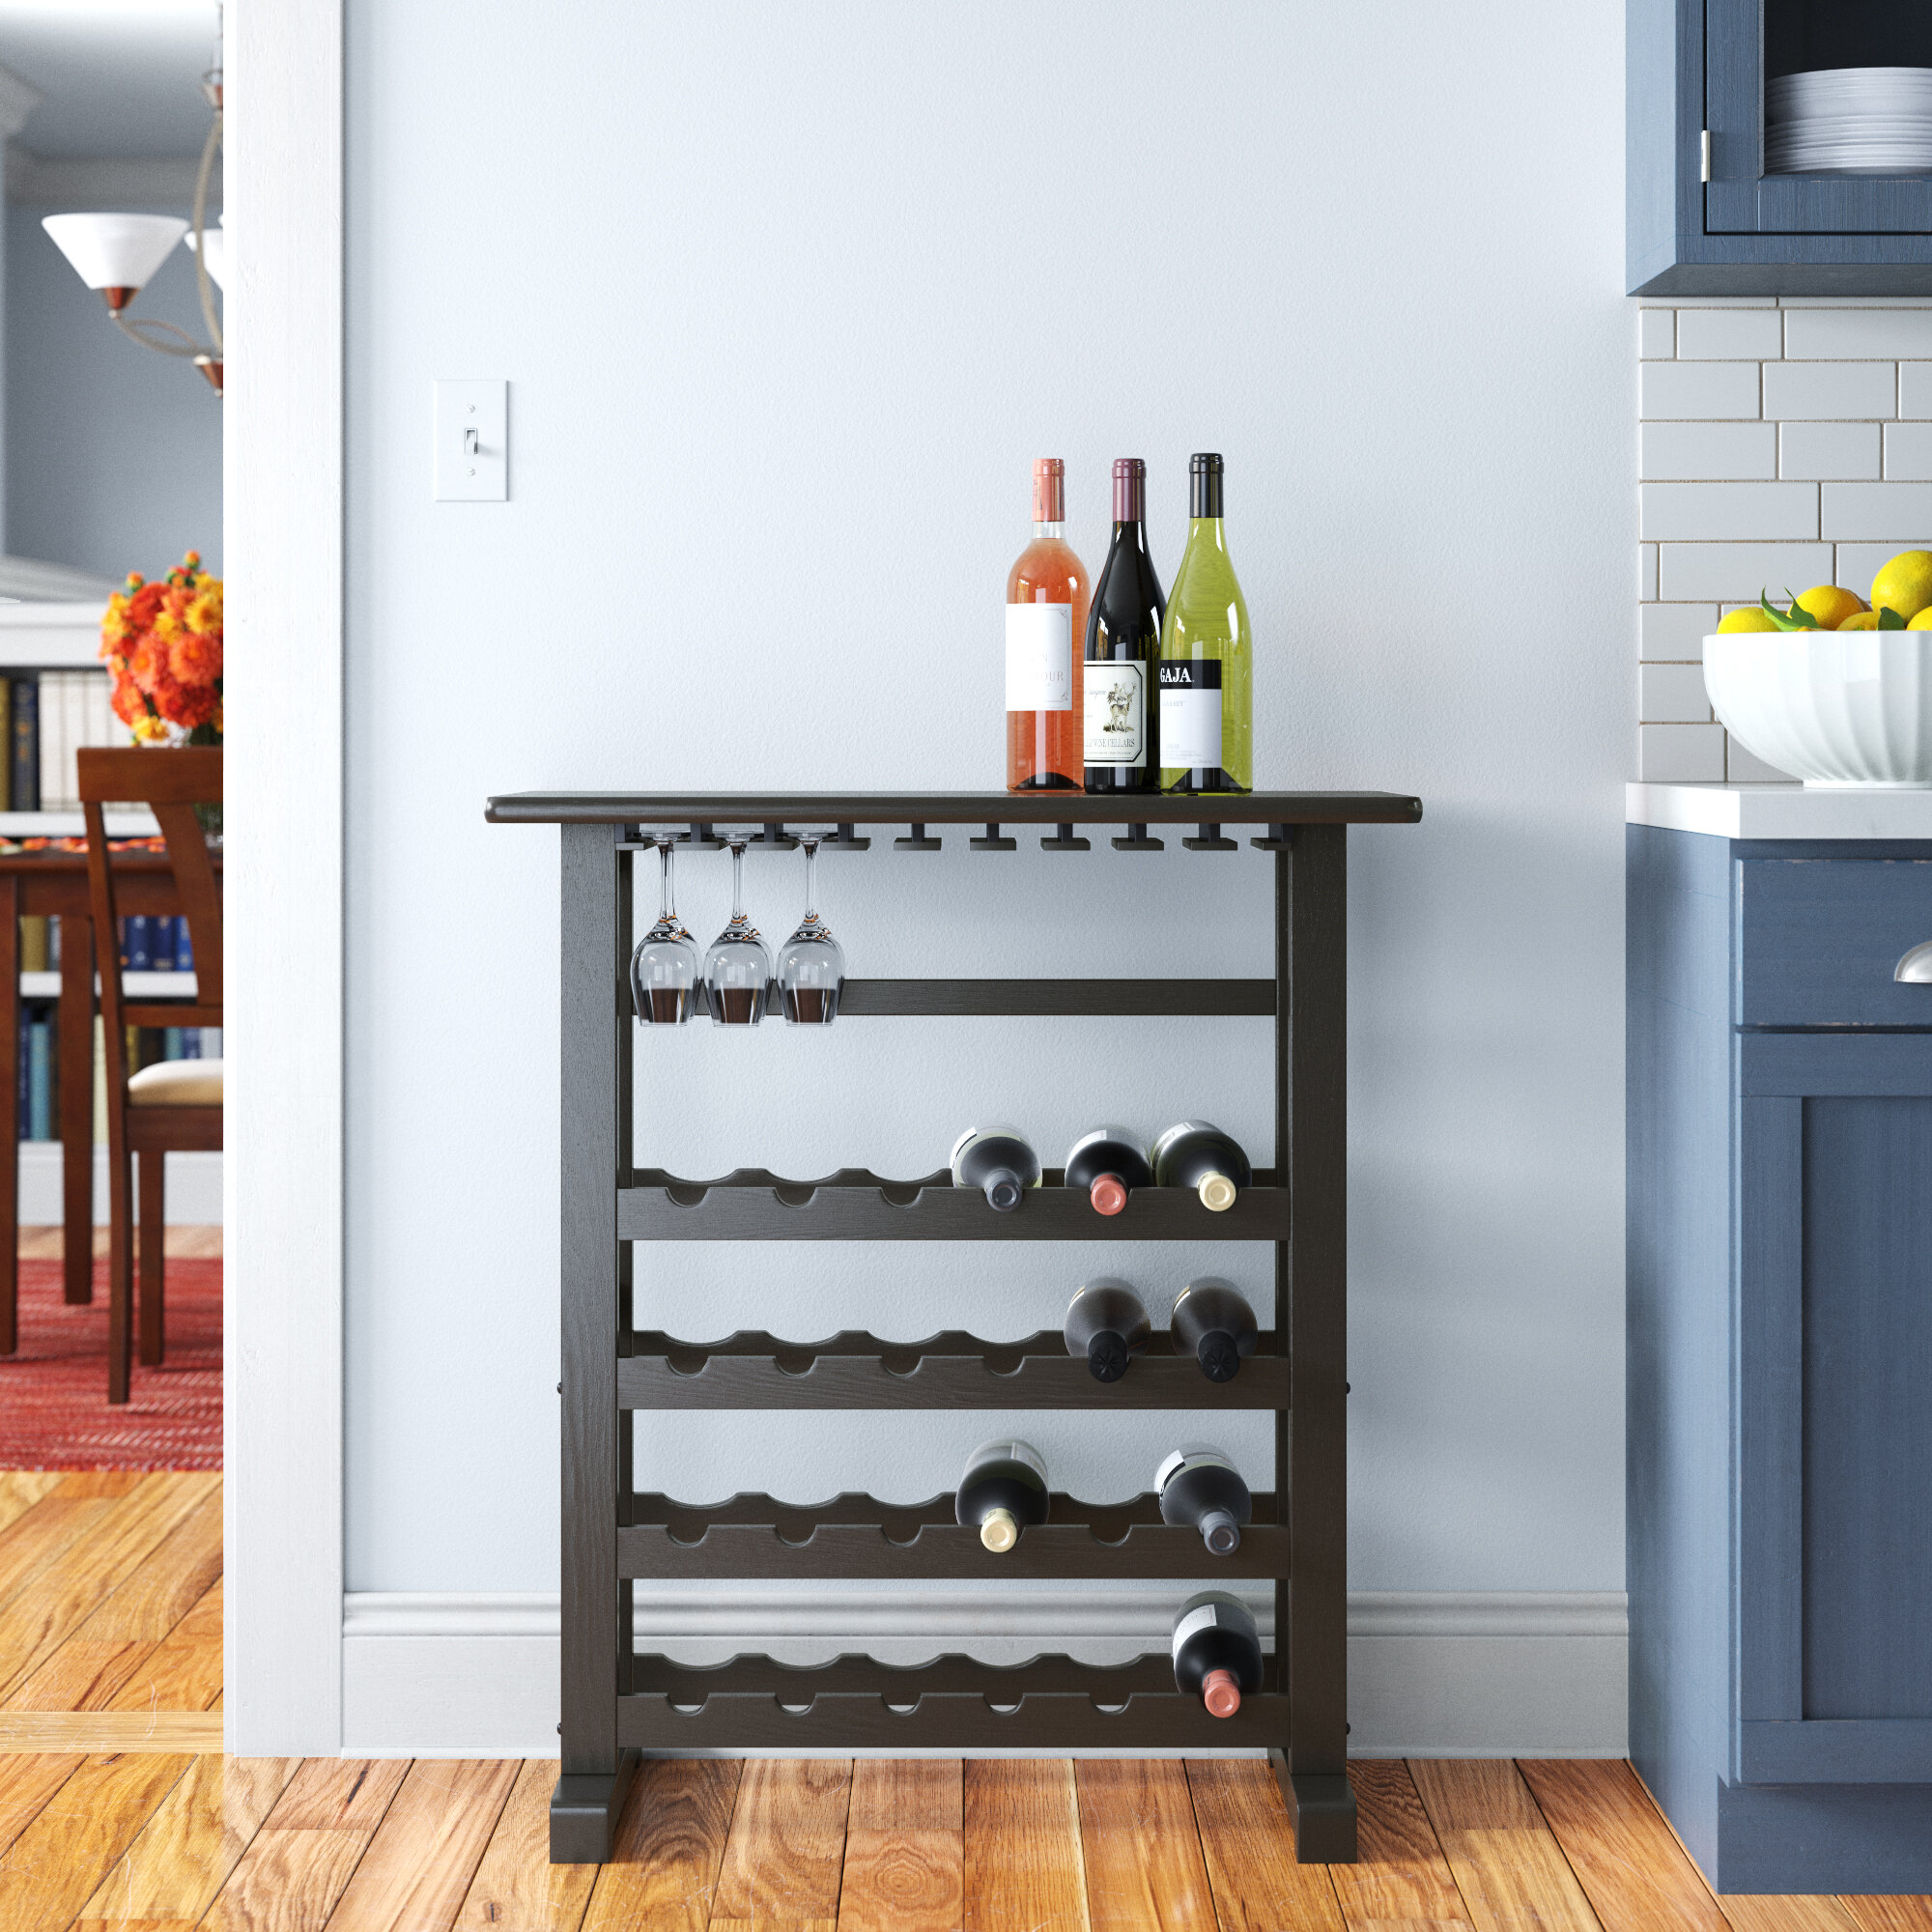 Wooden Shelving With Wine Glasses Storage Display Shelf Home Kitchen Decor Unit 